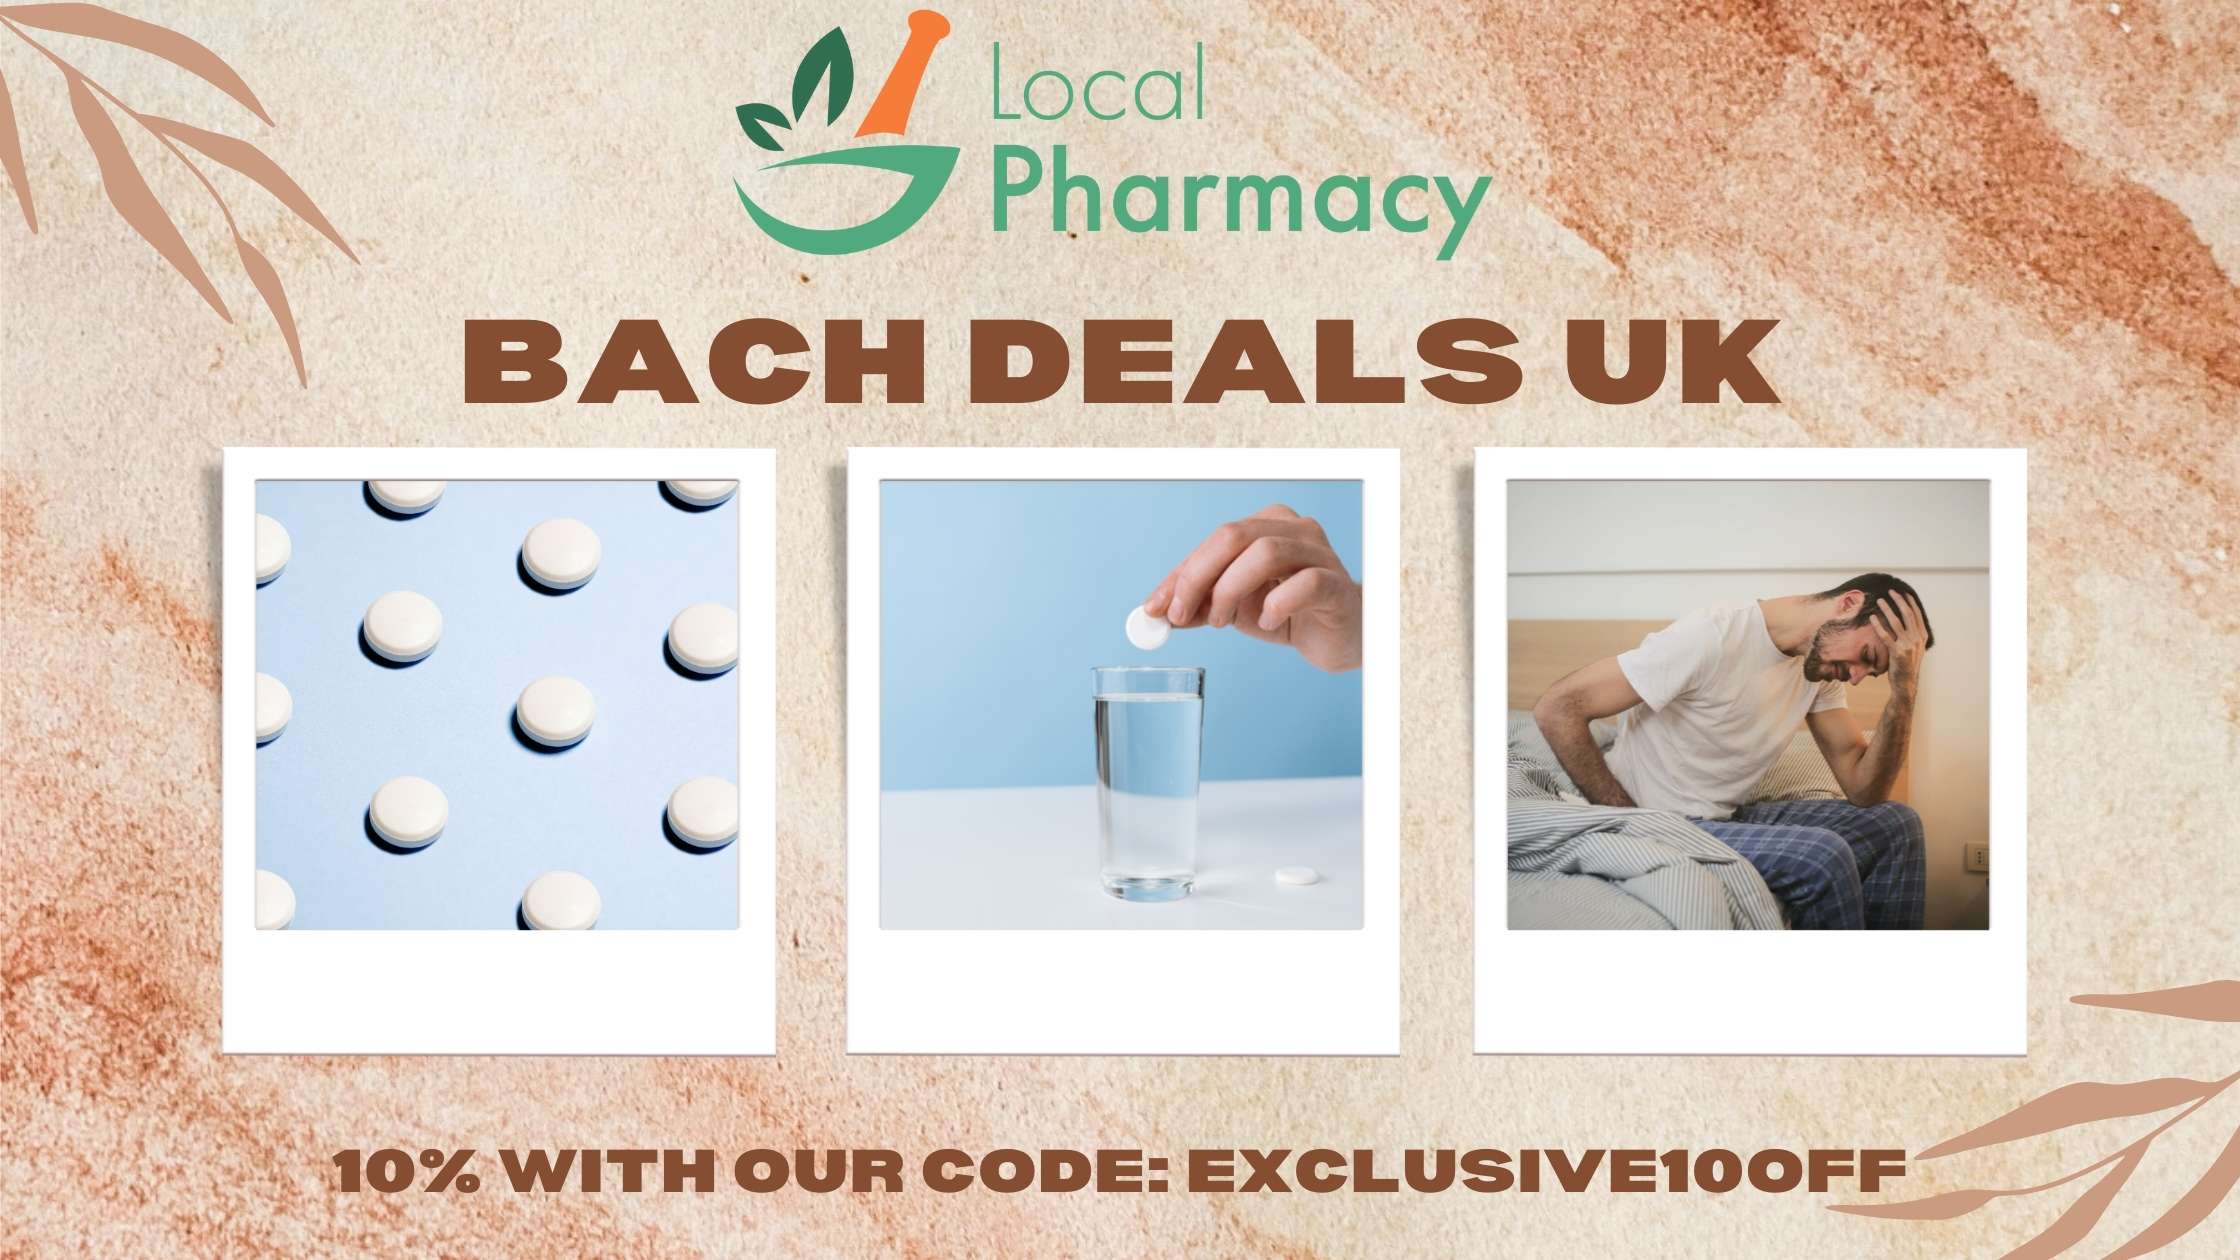 Bach coupon code and deals uk